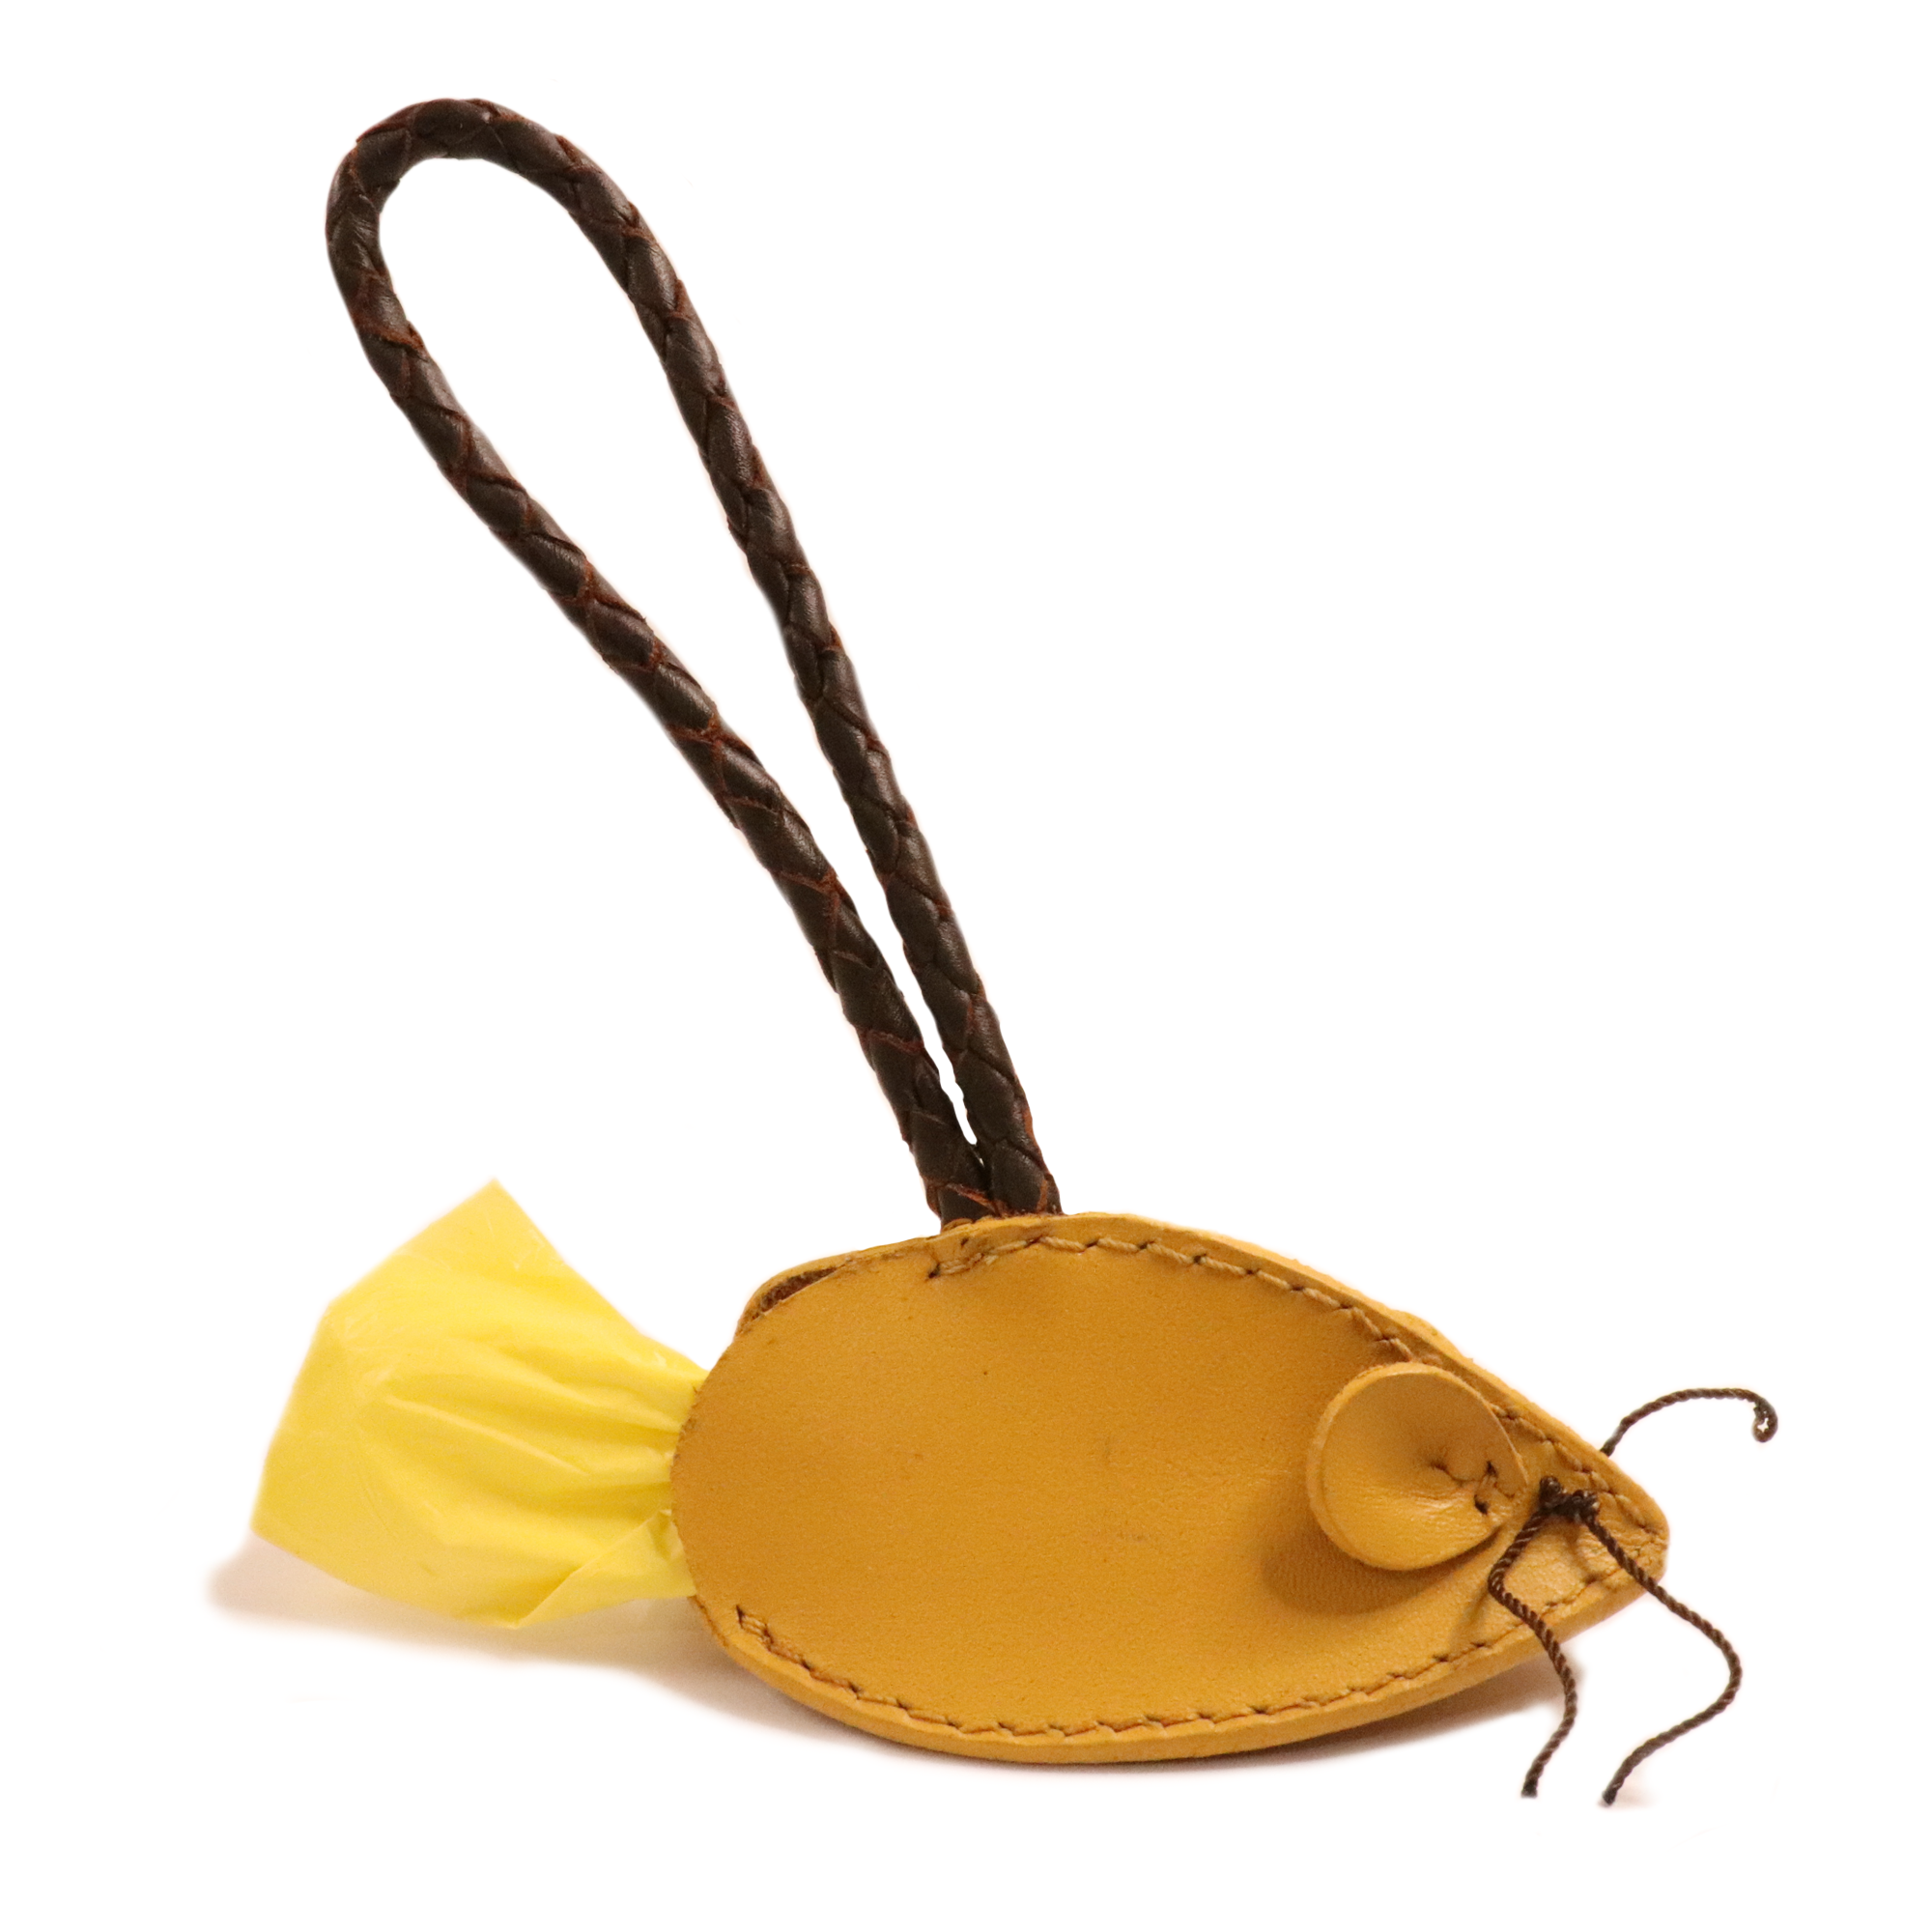 A handmade buffalo leather Mouse Poobag Dispenser wheat with a long twisted handle, resembling a mouse with protruding ears and tail, complemented by a bright yellow fabric detail, isolated on a white background from Georgie Paws.